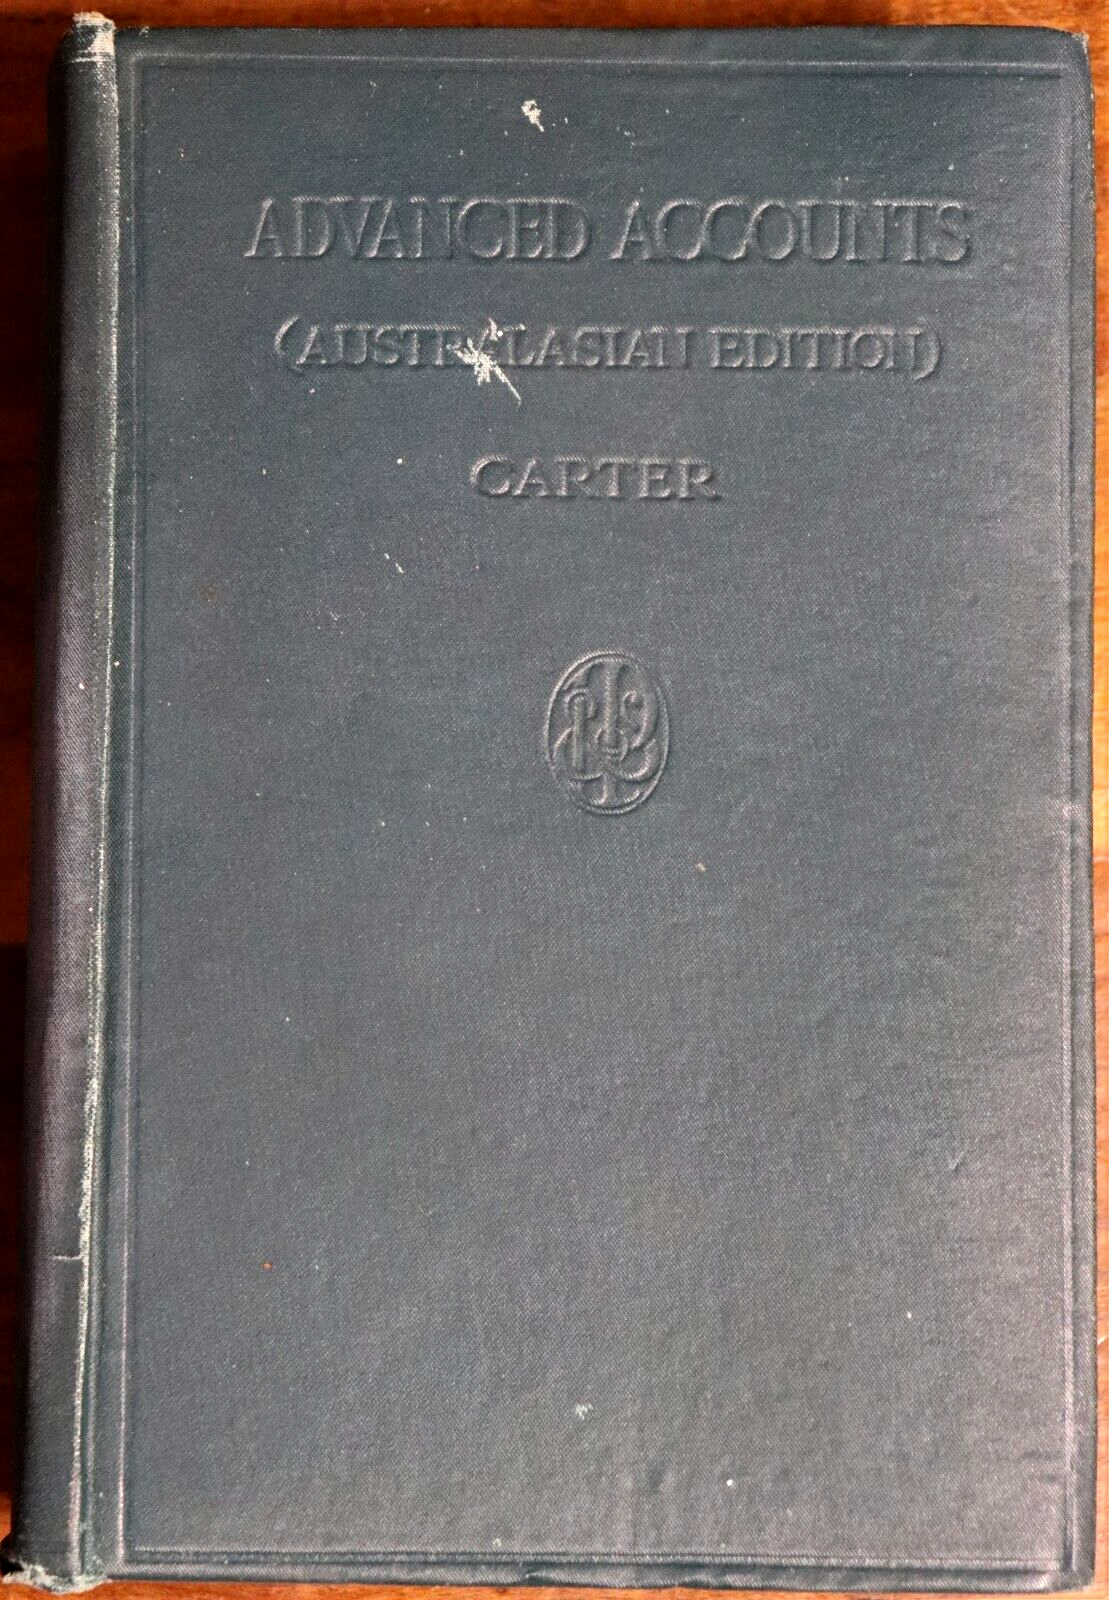 Advanced Accounts - 1944 - Antique Australian Accounting Reference Book